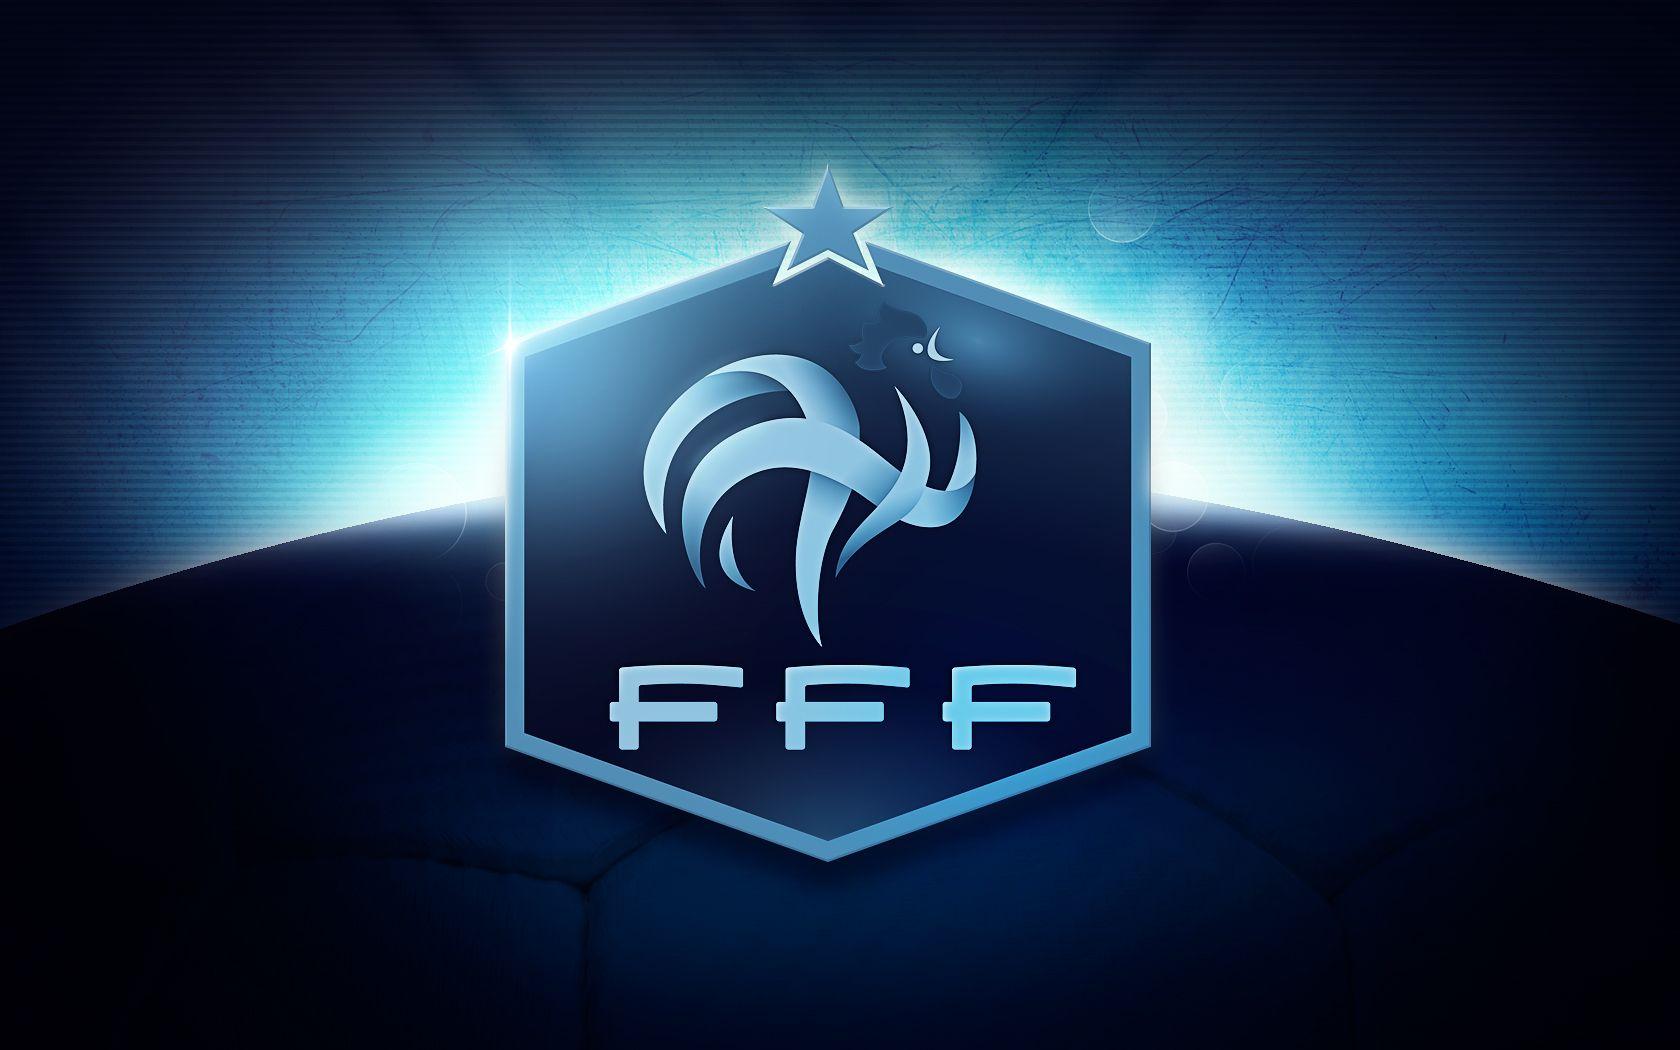 FFF Logo and HQ Wallpaper. Full HD Picture